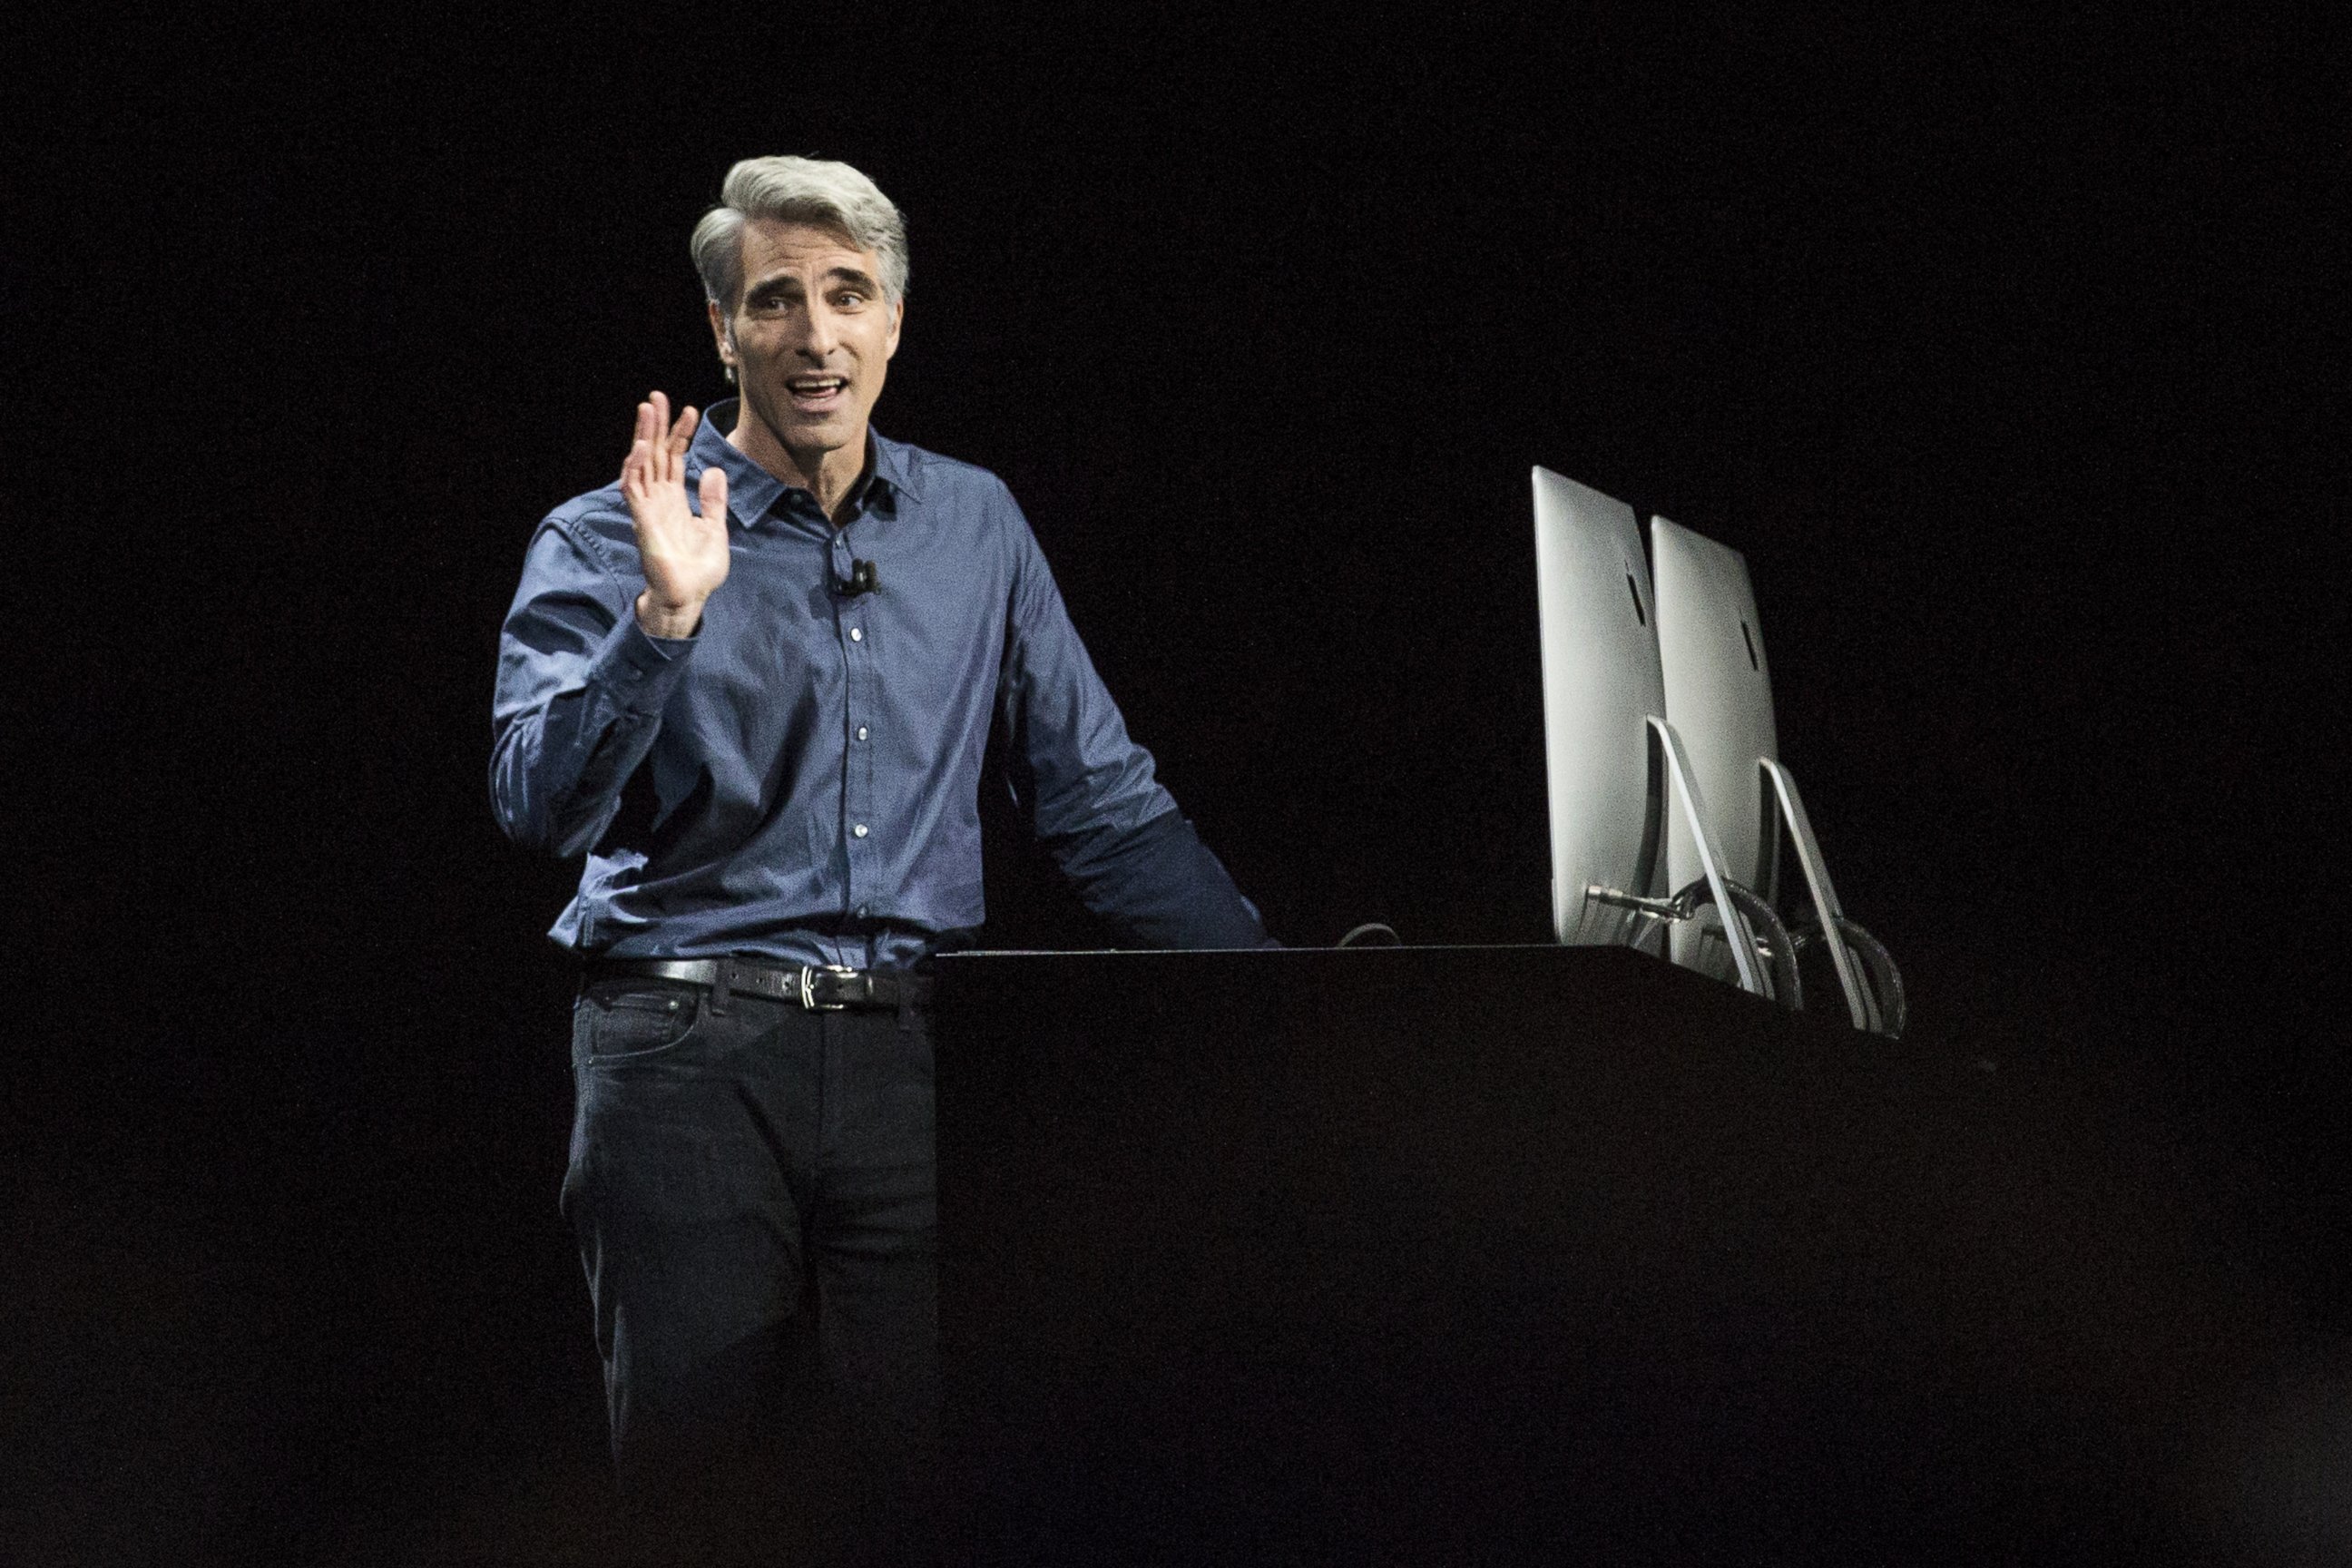 PHOTO: Craig Federighi, Apple's senior vice president of Software Engineering, introduces the new macOS Sierra software at an Apple event at the Worldwide Developer's Conference, June 13, 2016 in San Francisco.